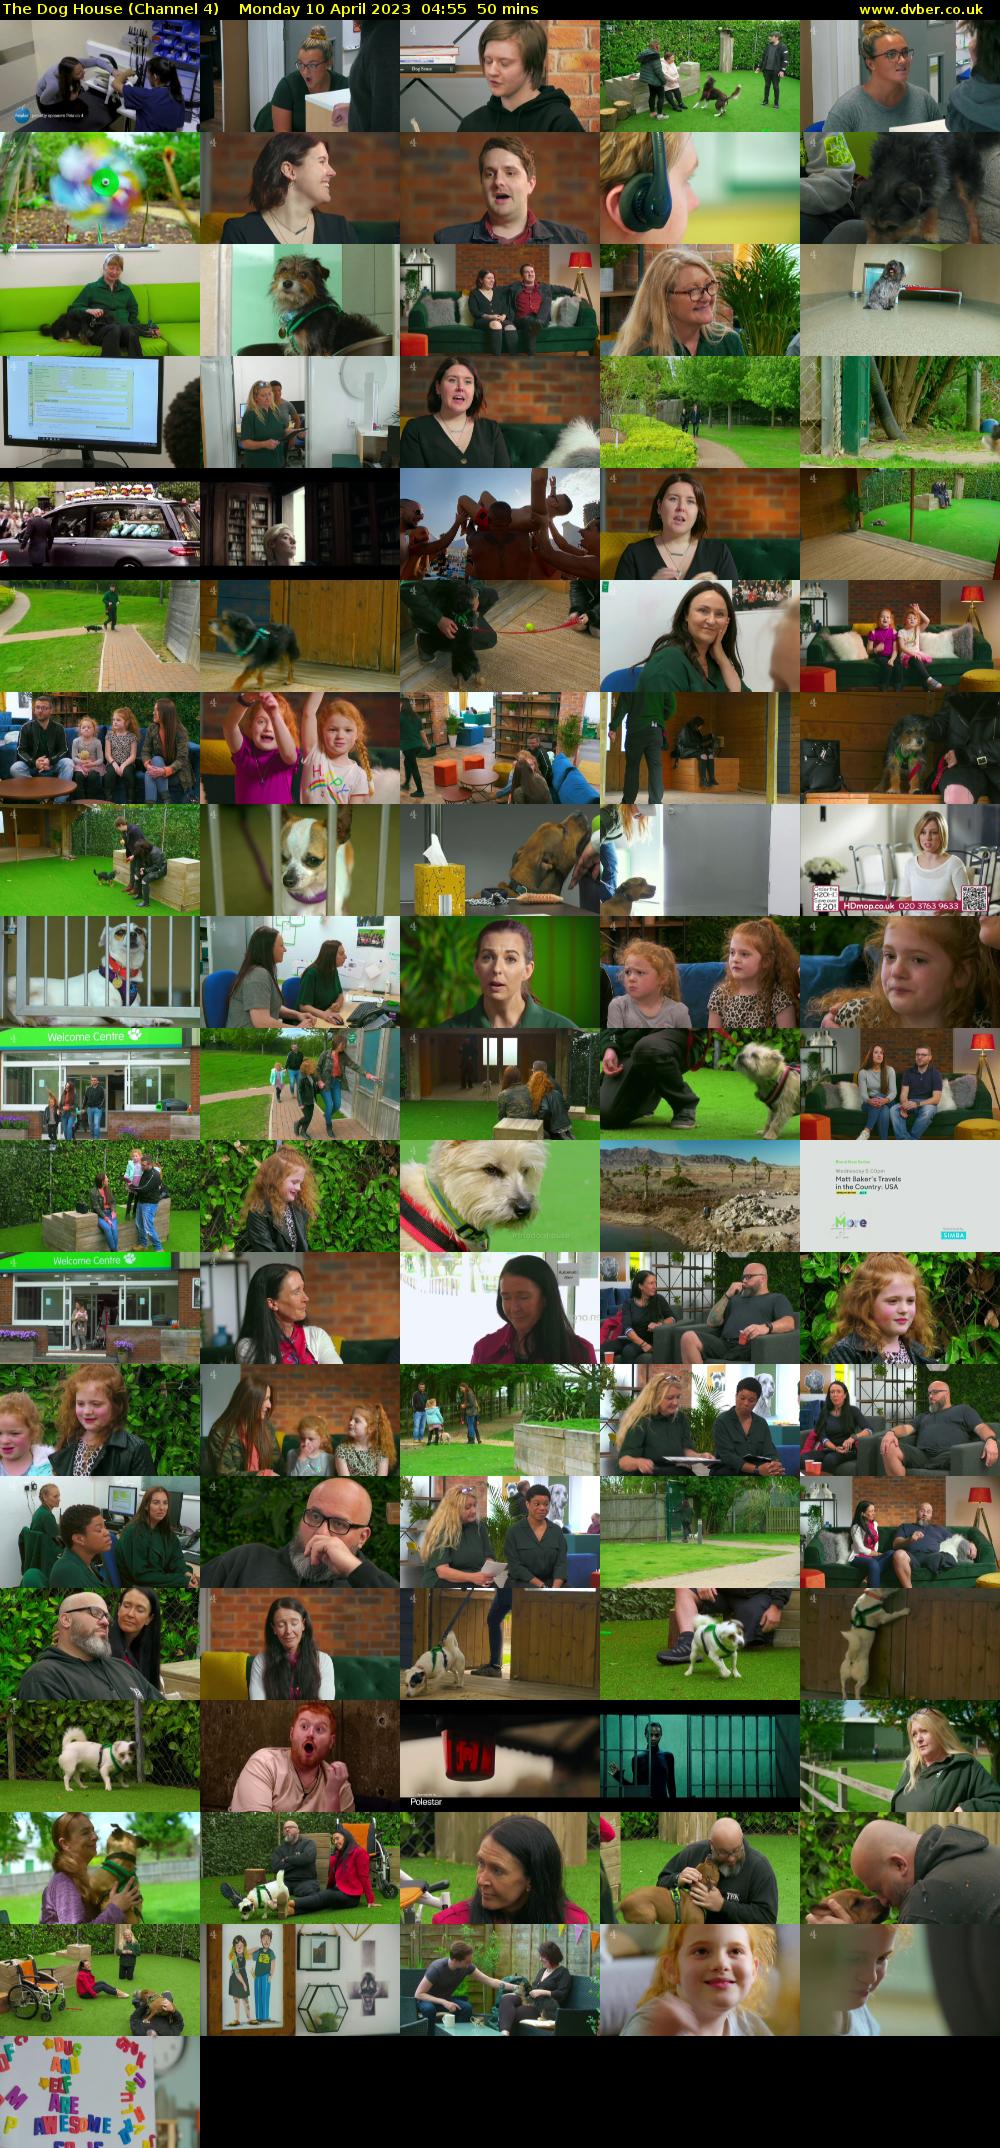 The Dog House (Channel 4) Monday 10 April 2023 04:55 - 05:45